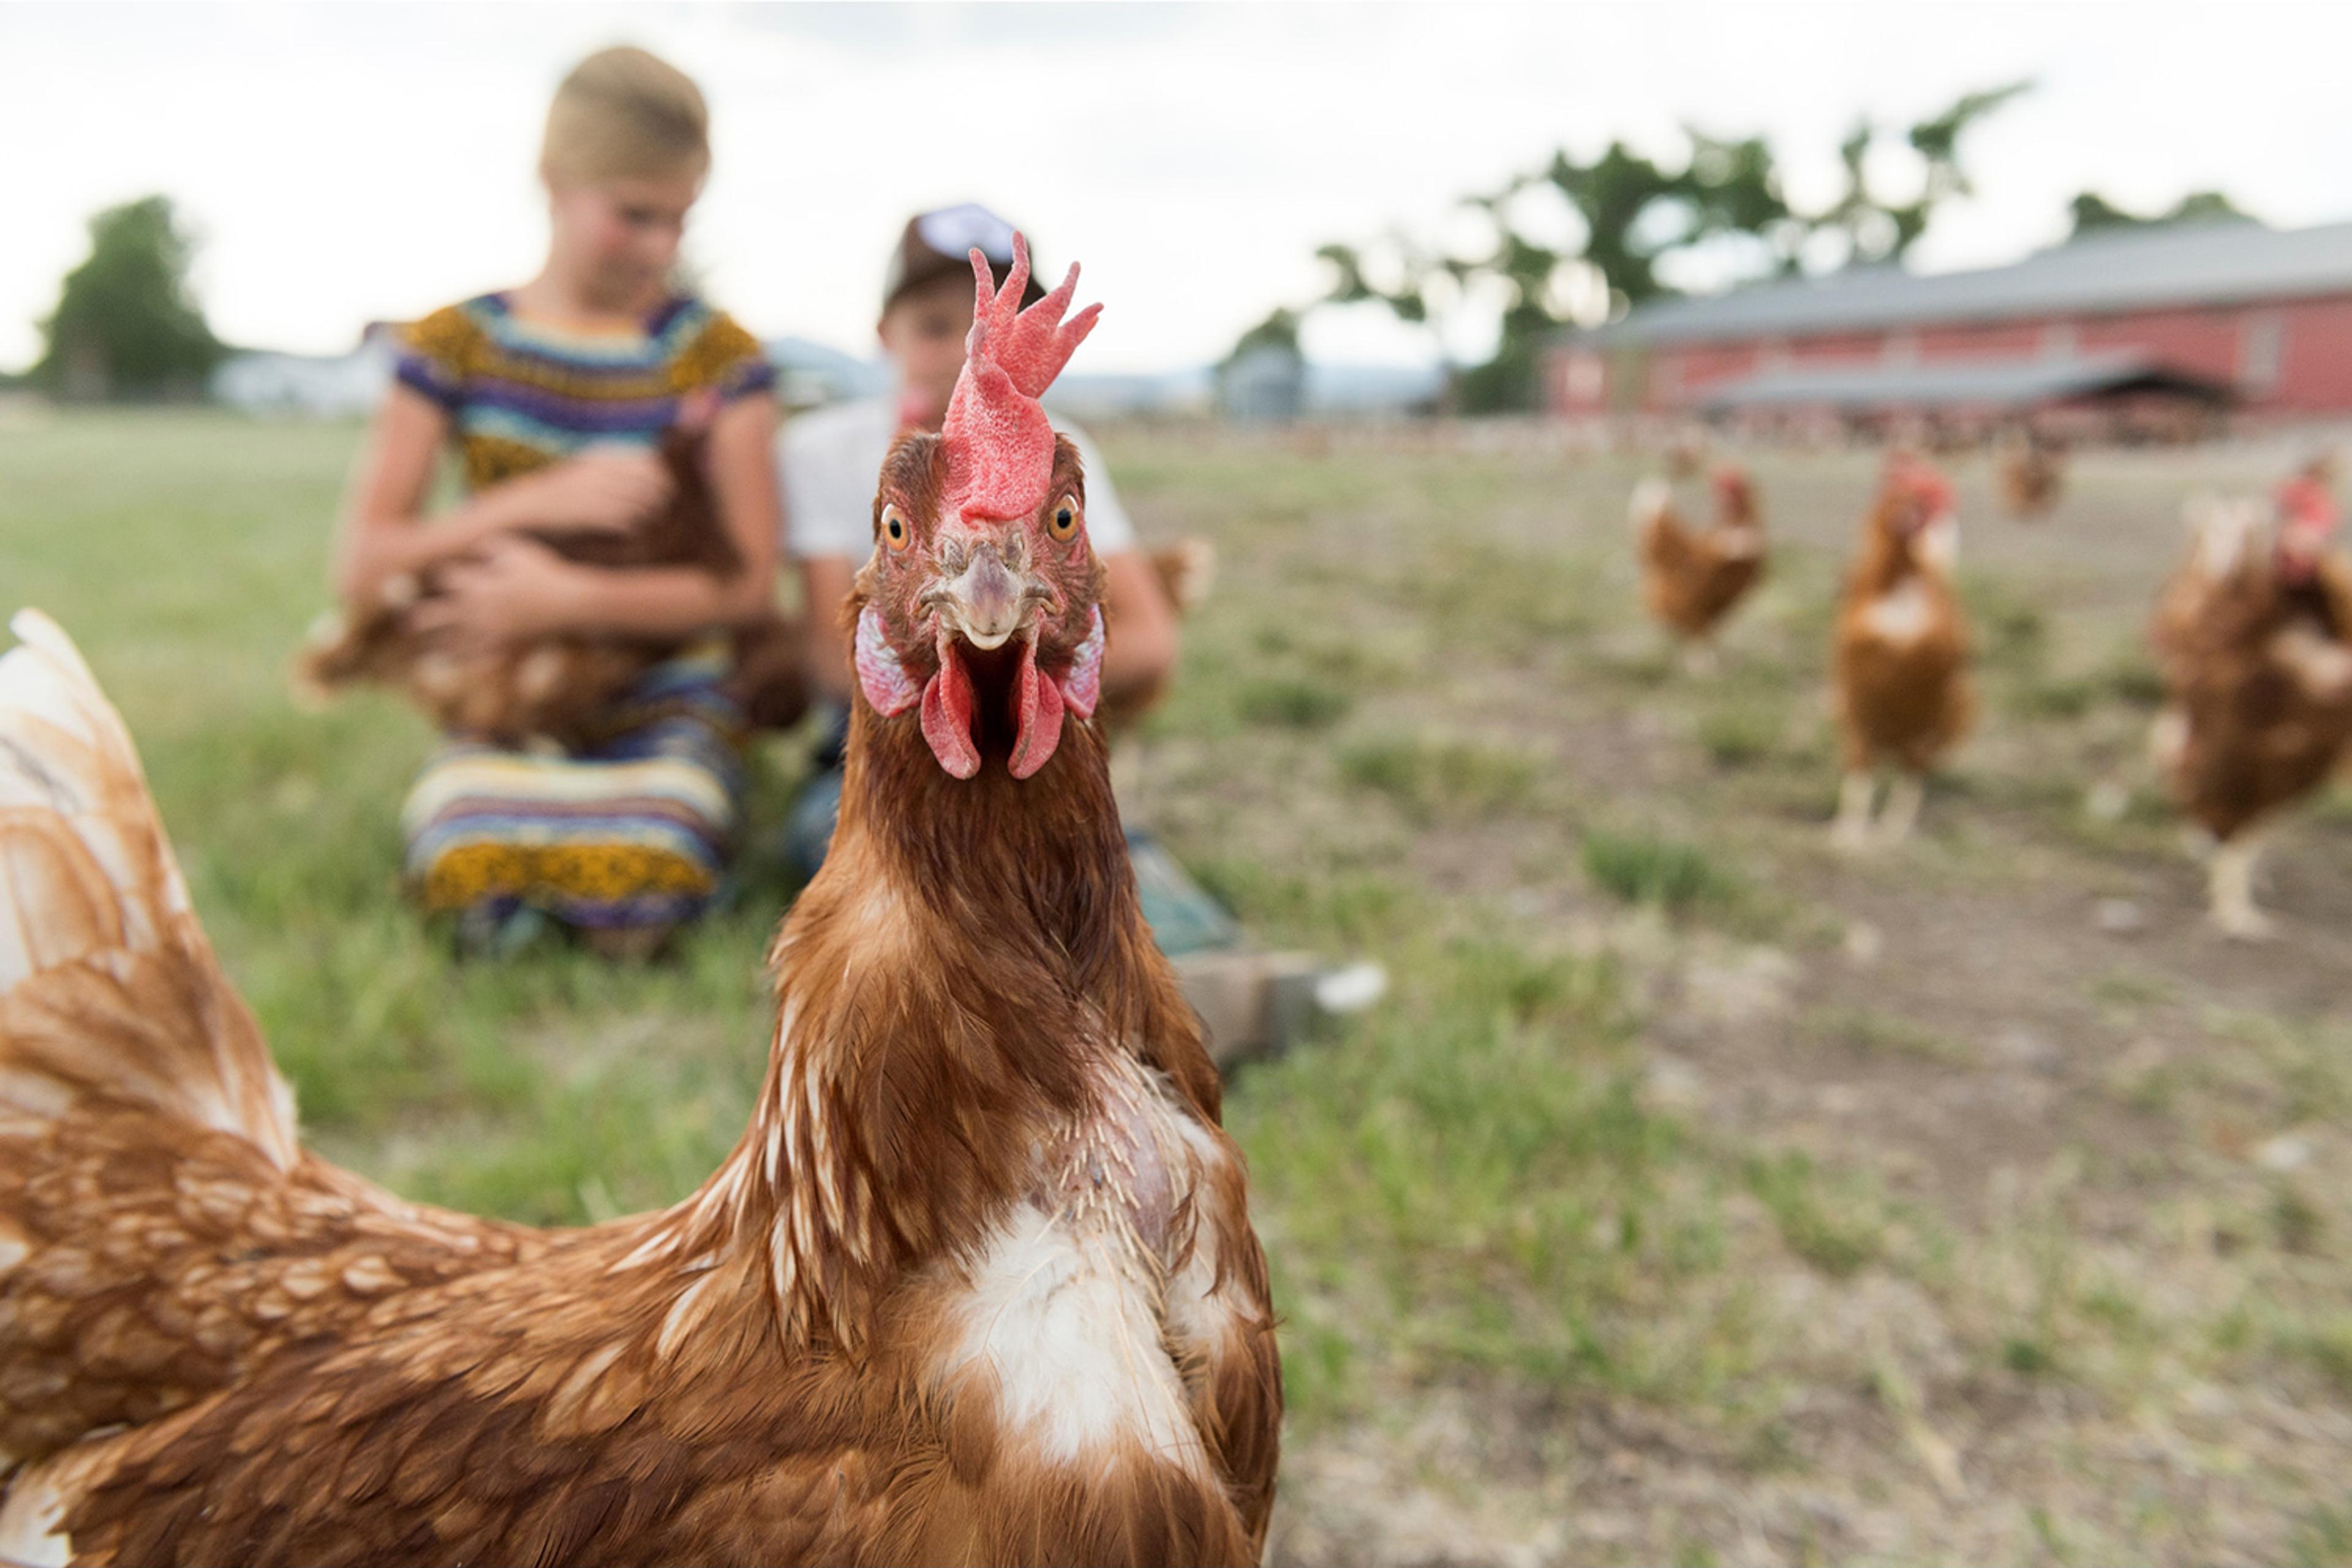 This Bovan Brown chicken on the Toews’ Organic Valley egg farm lays brown eggs.